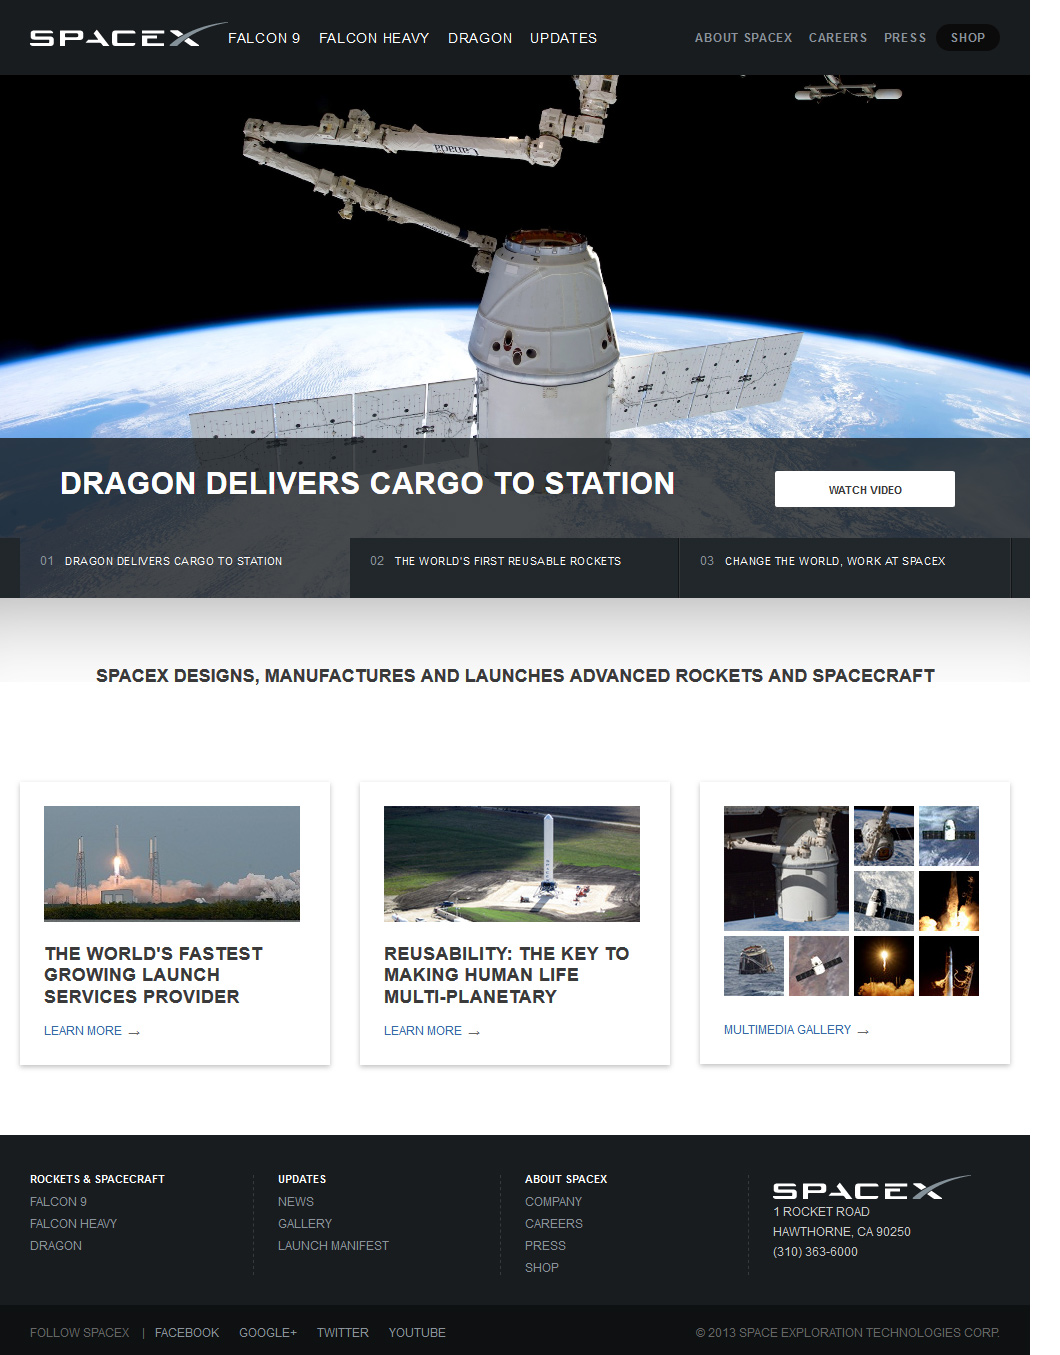 SpaceX website in 2013